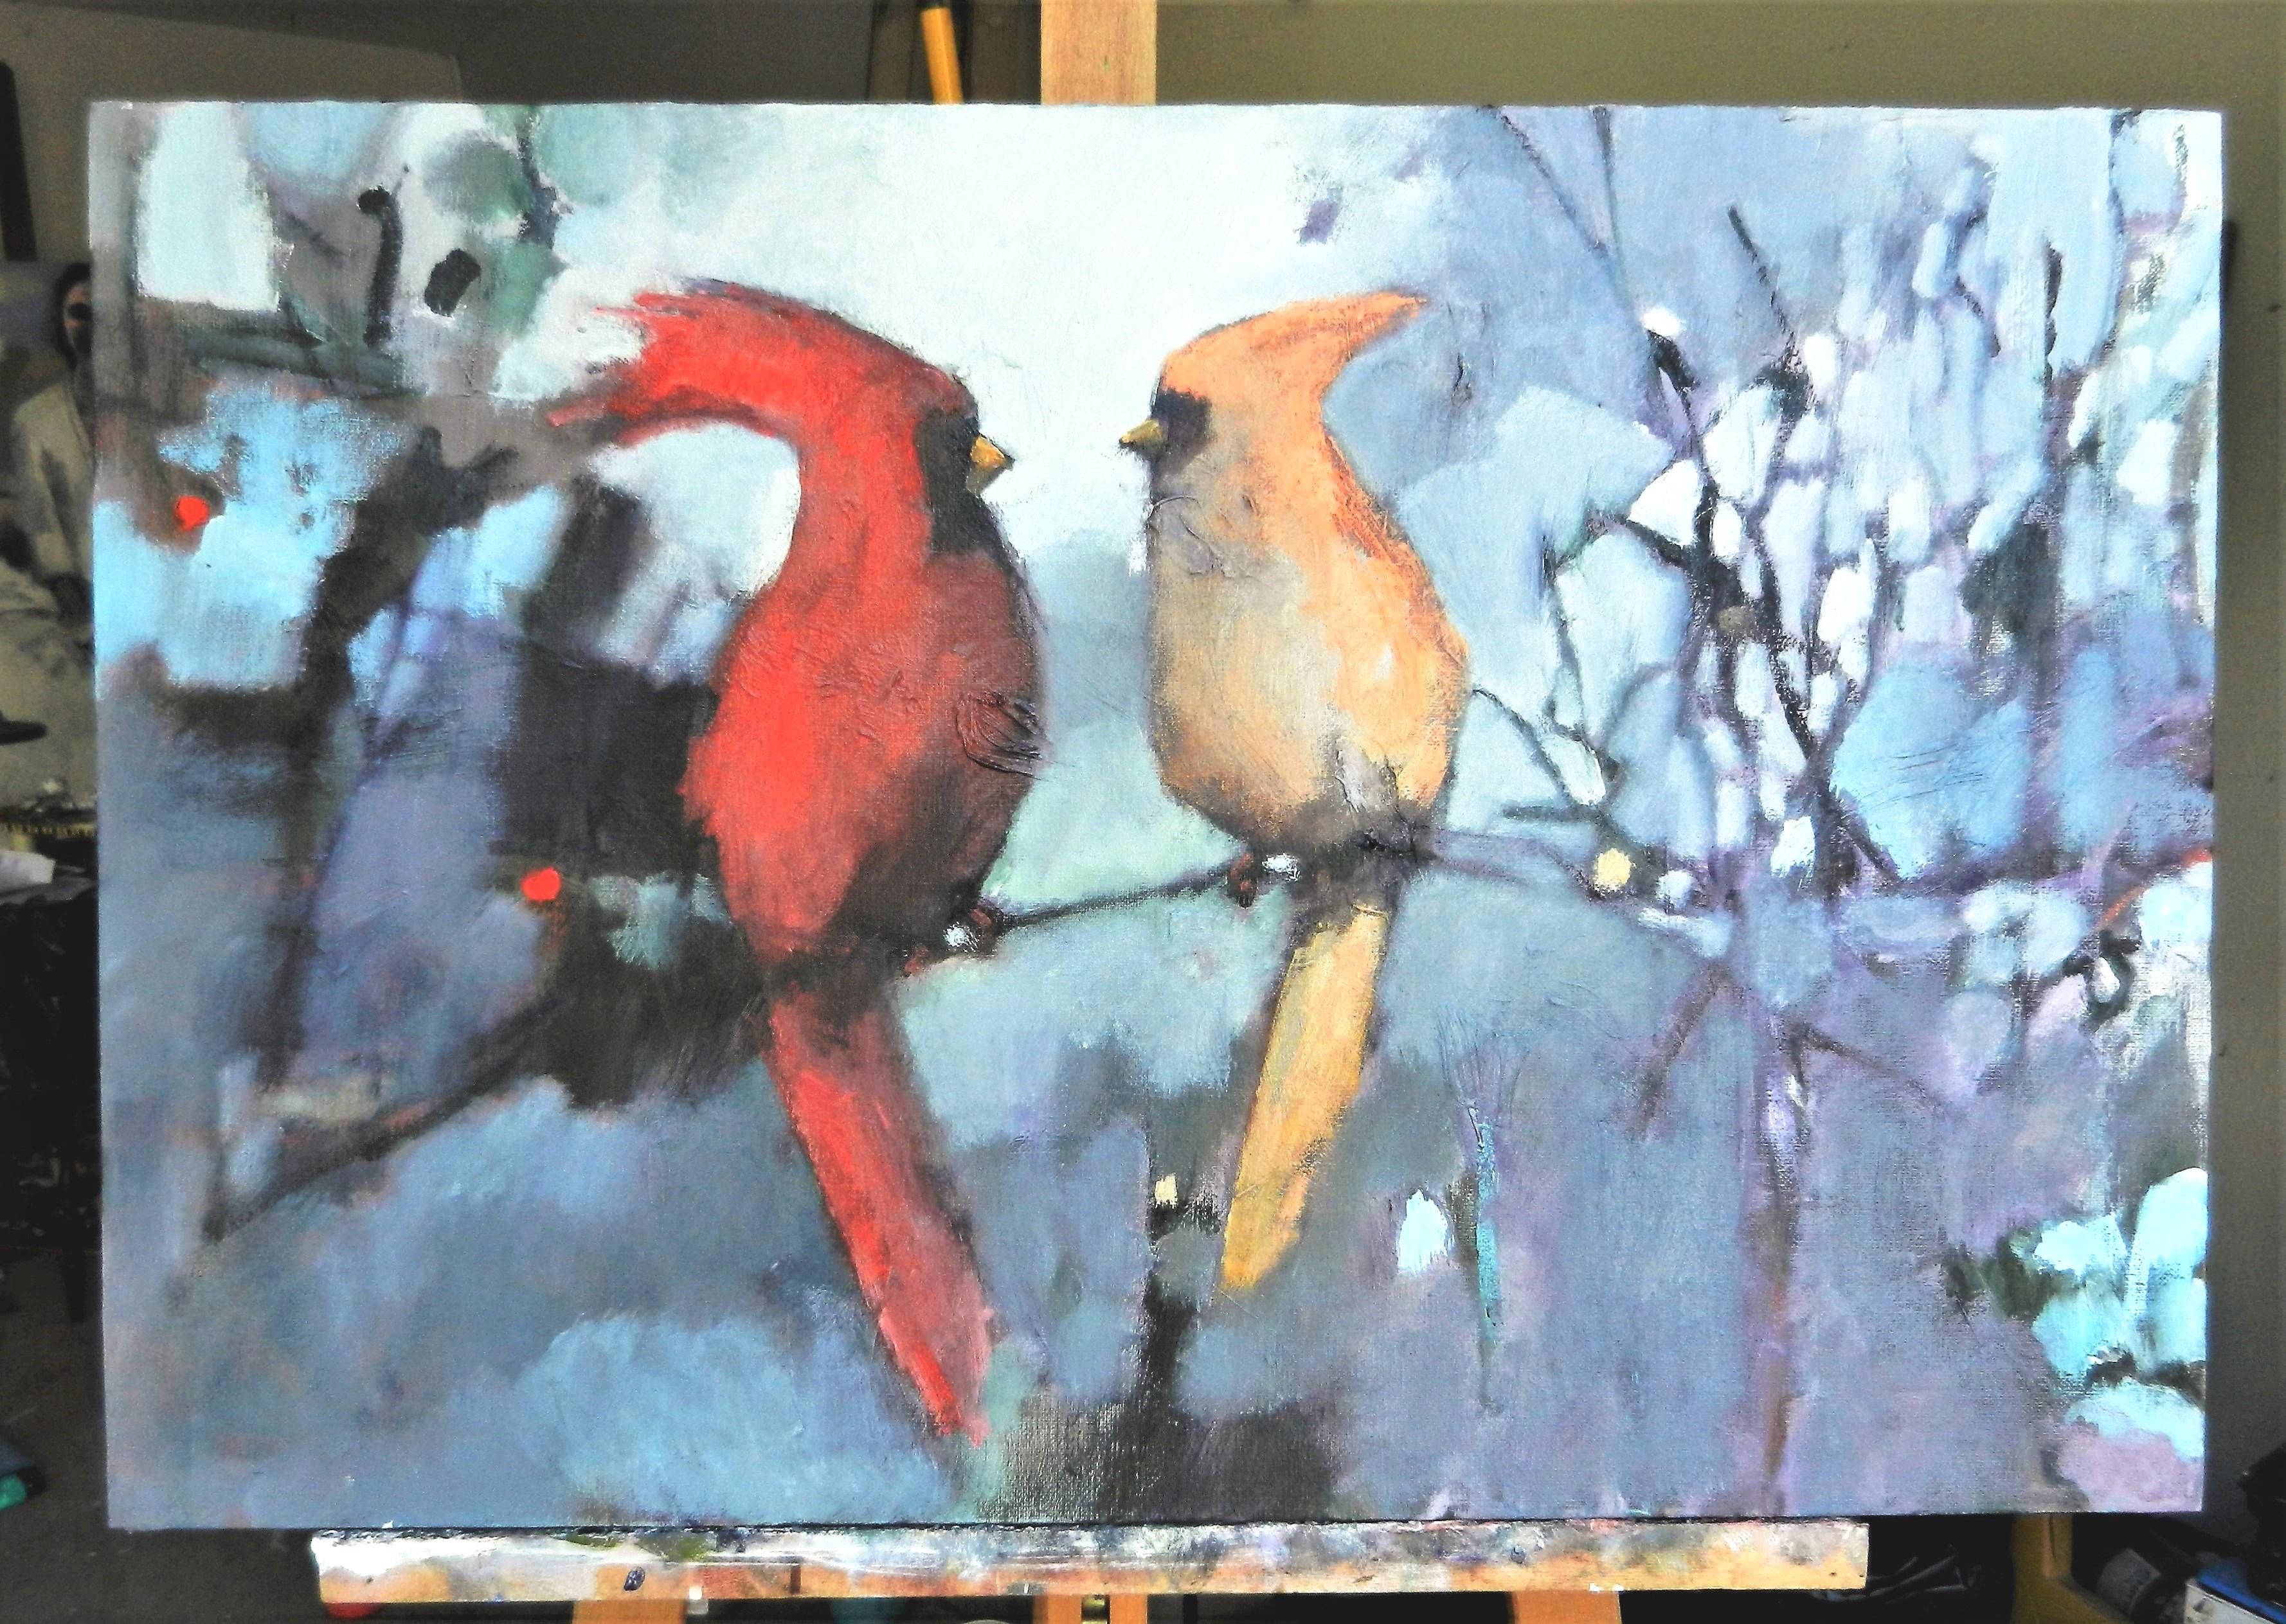 <p>Artist Comments<br />Visiting cardinal couples again, I painted this duo in stark contrast indicating the male and female difference. The background's muted colors and subtle patterns contrast the rich color in the birds making them